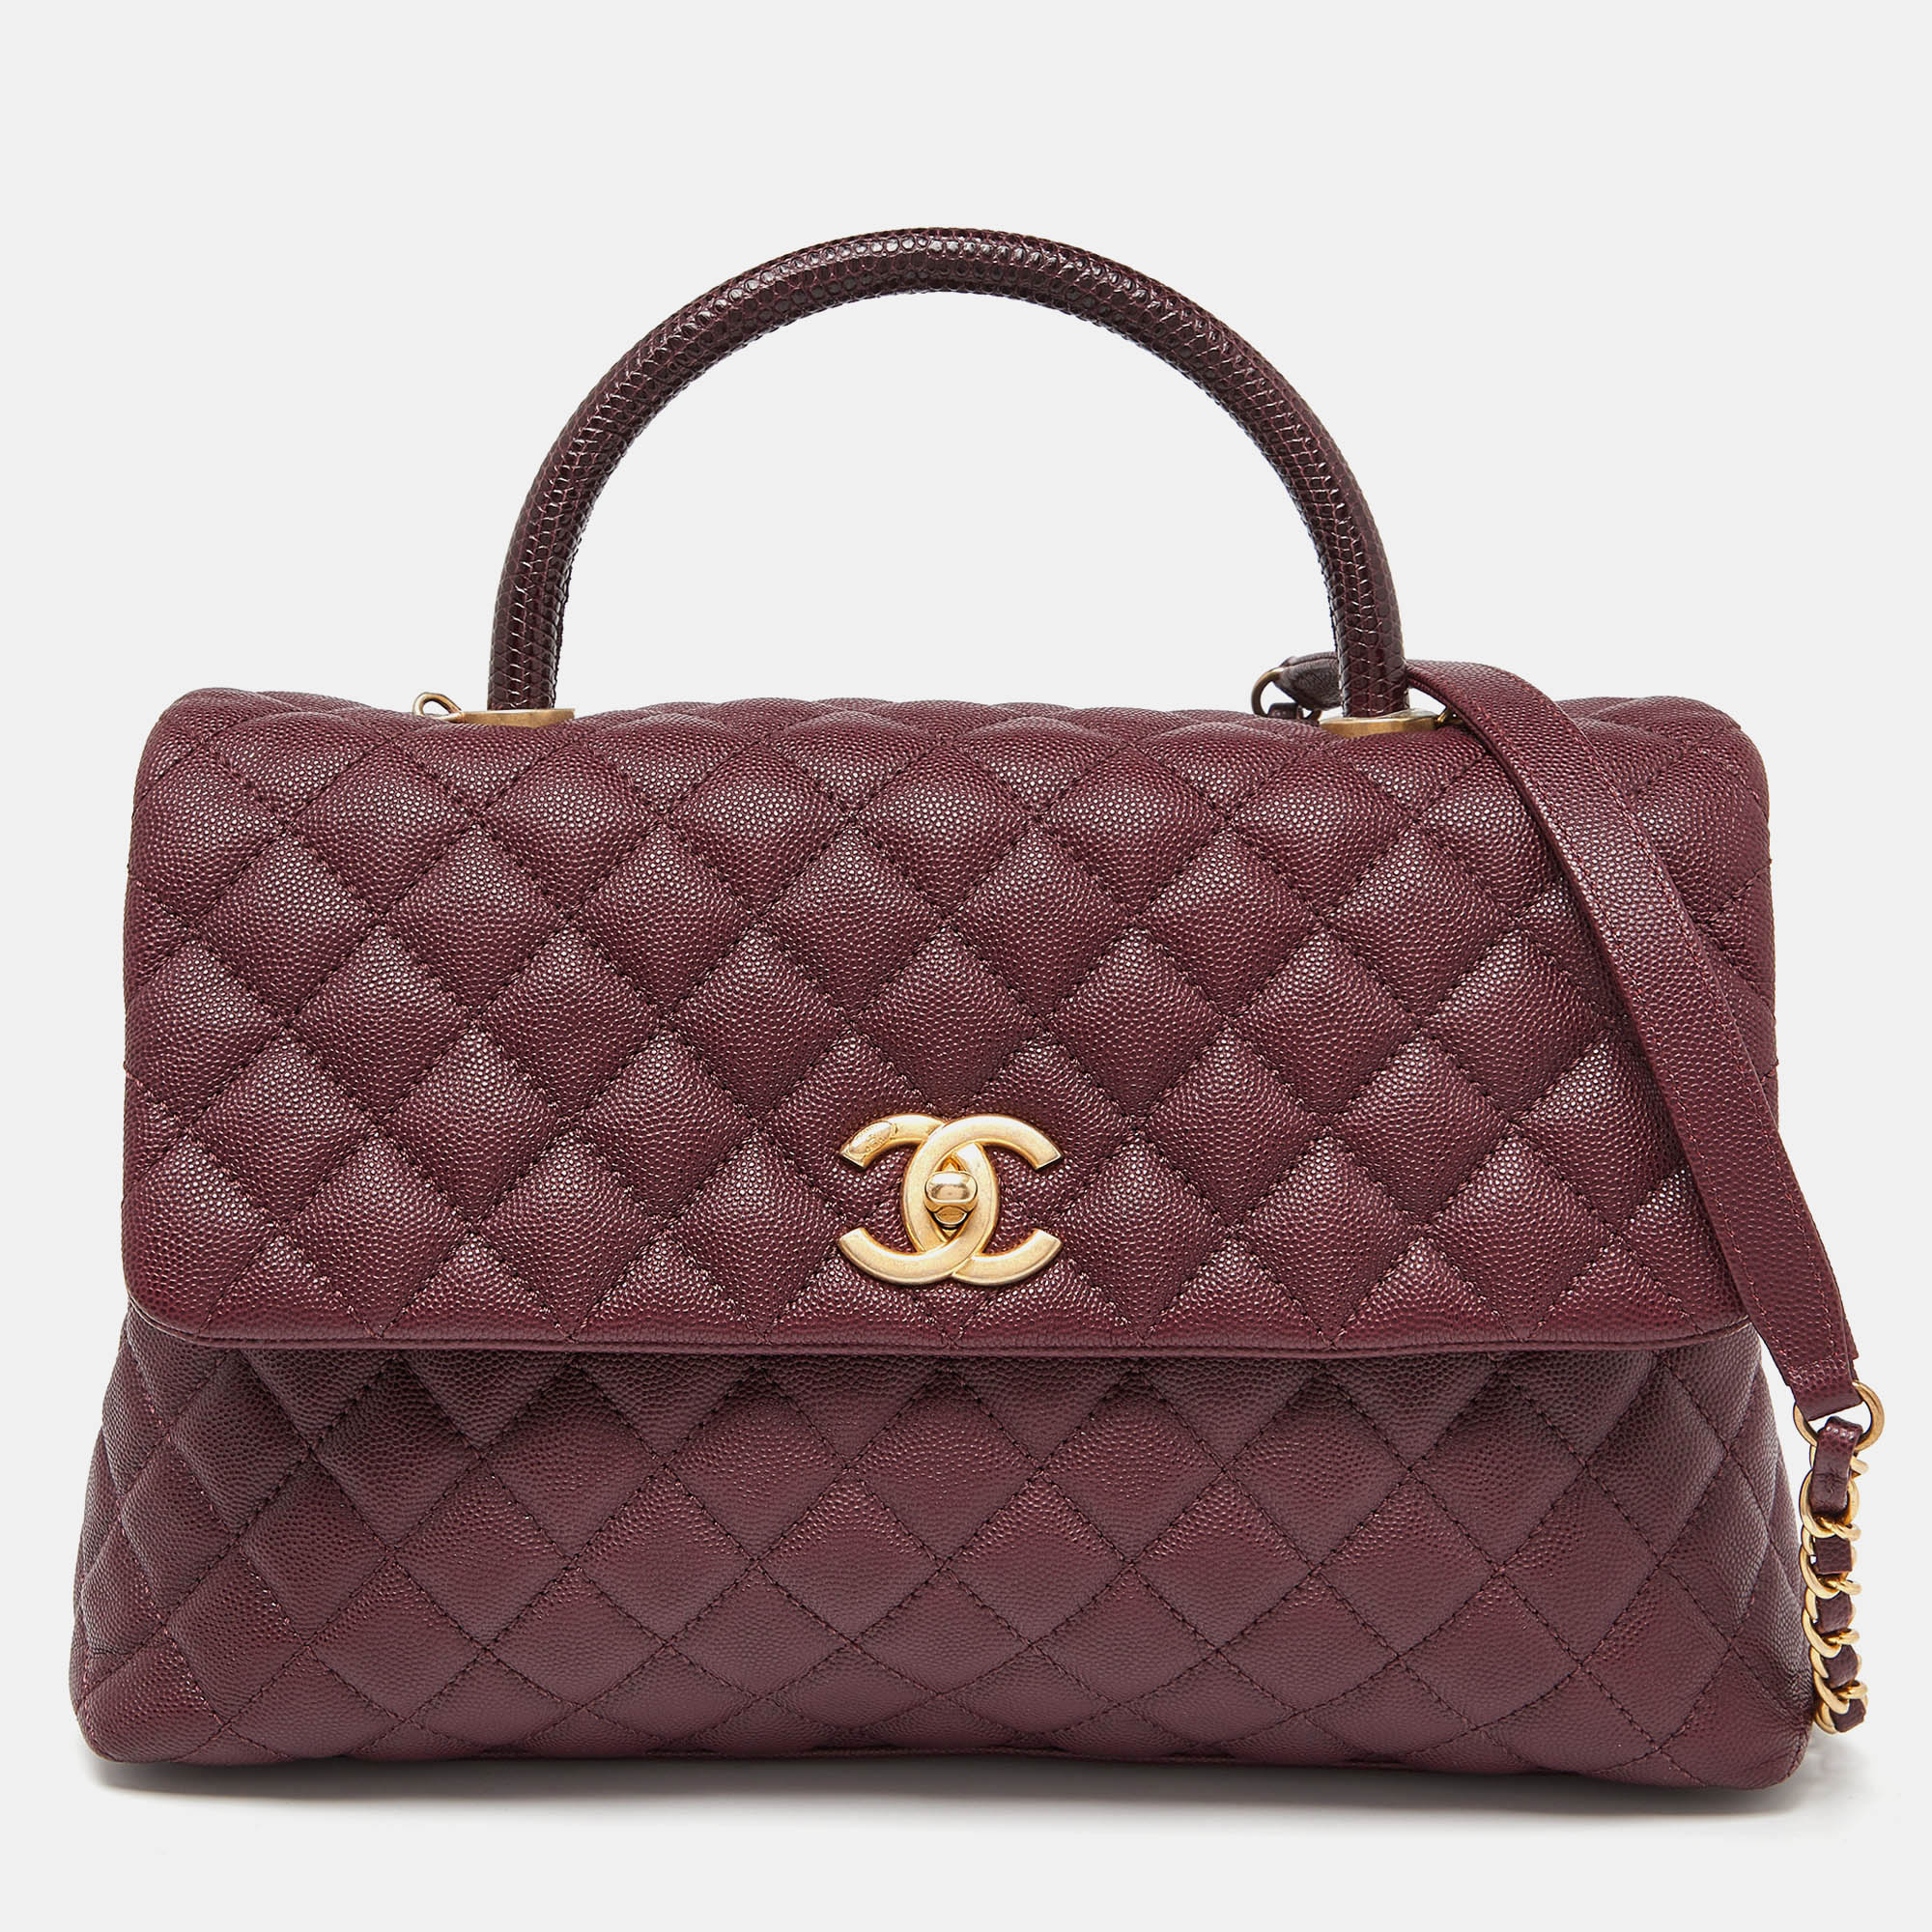 Chanel burgundy quilted caviar leather and lizard medium coco top handle bag